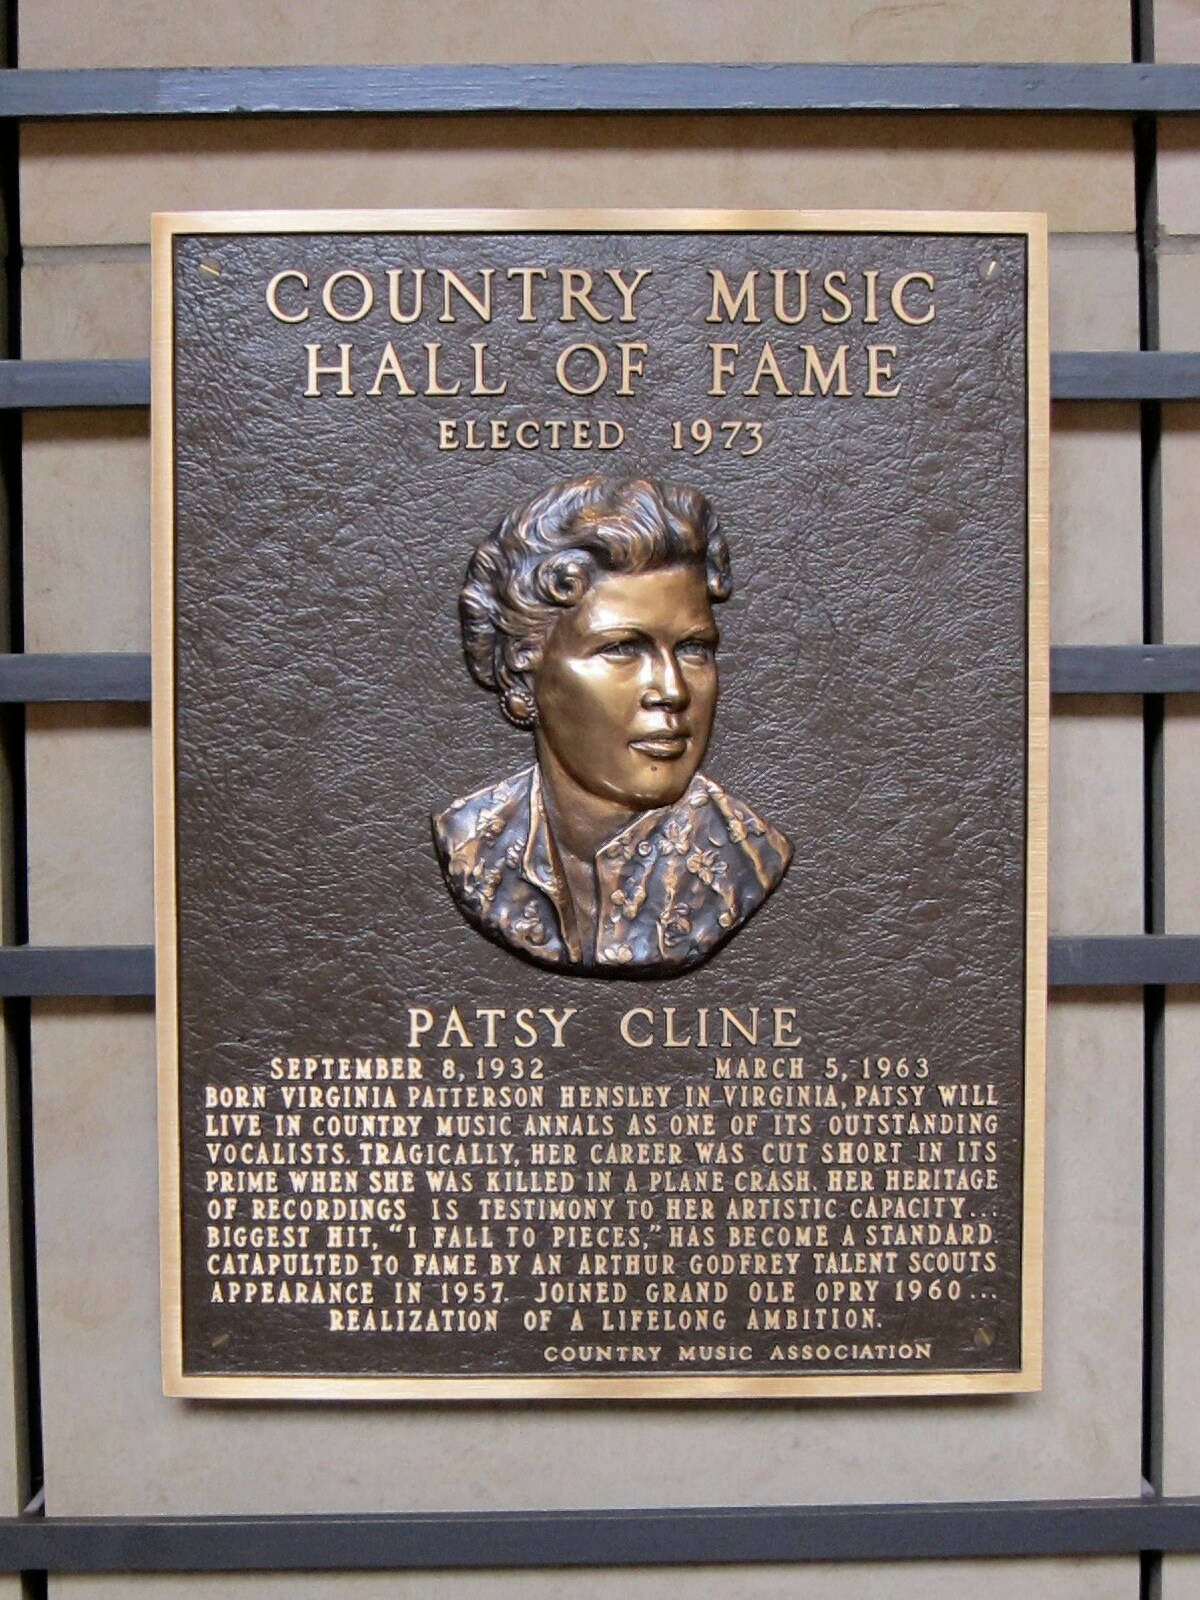 Patsy Cline - A Luminous Talent in Country Music Wallpaper